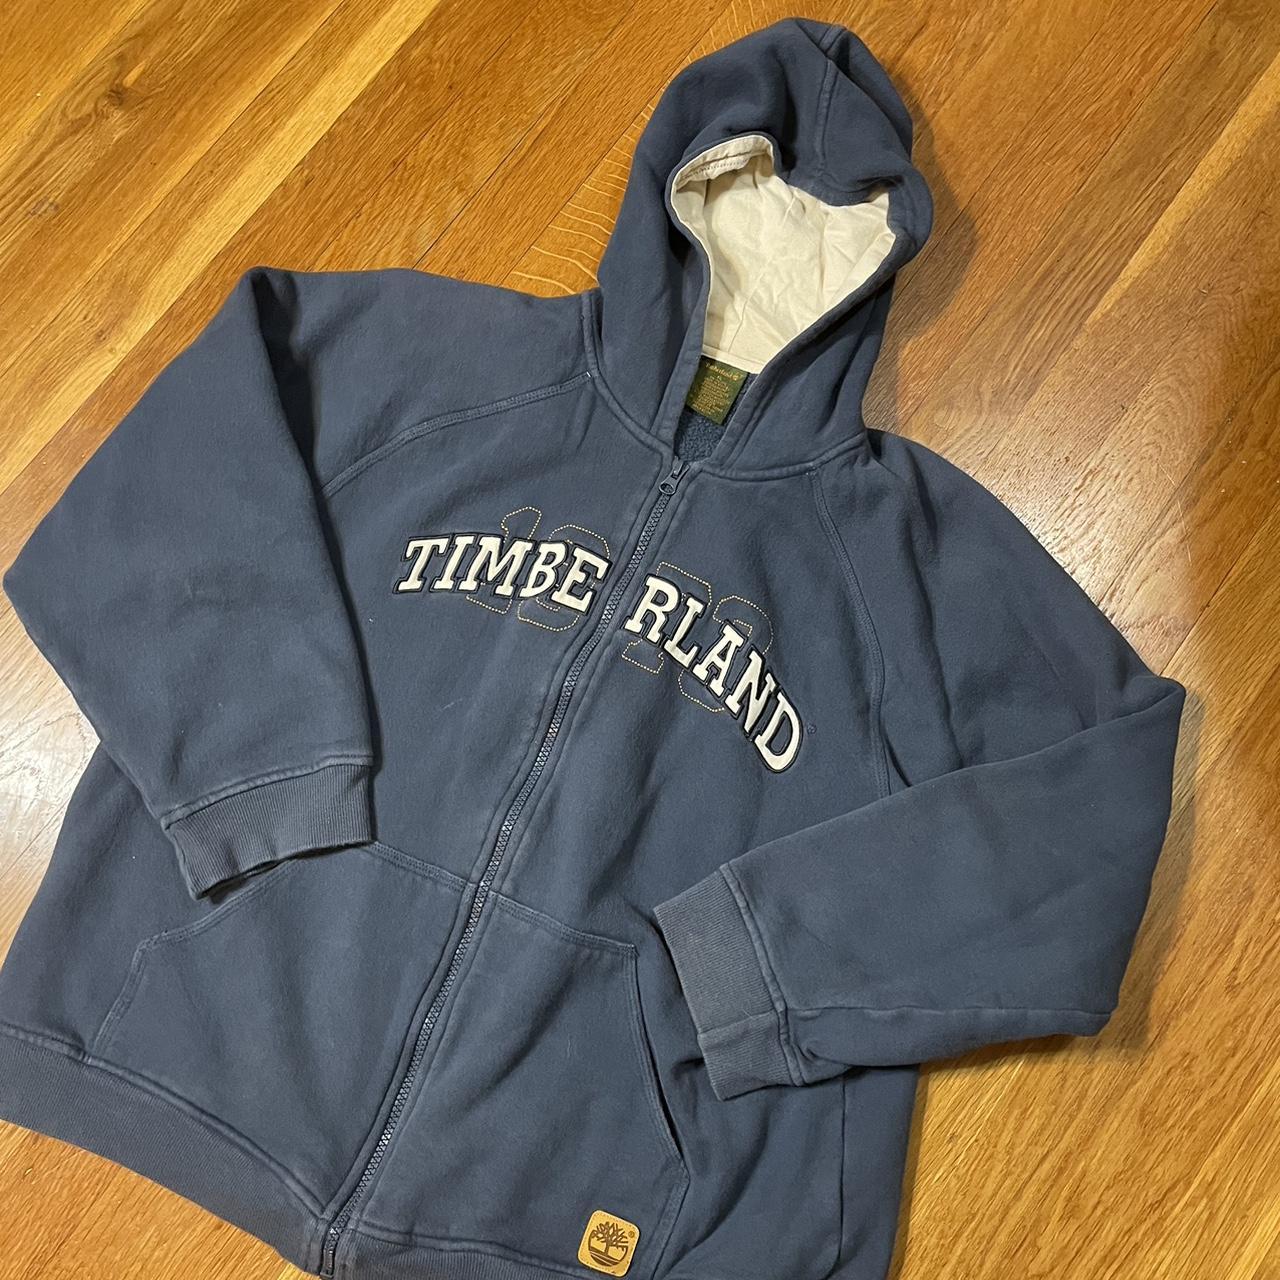 item listed by thegarmentdealer